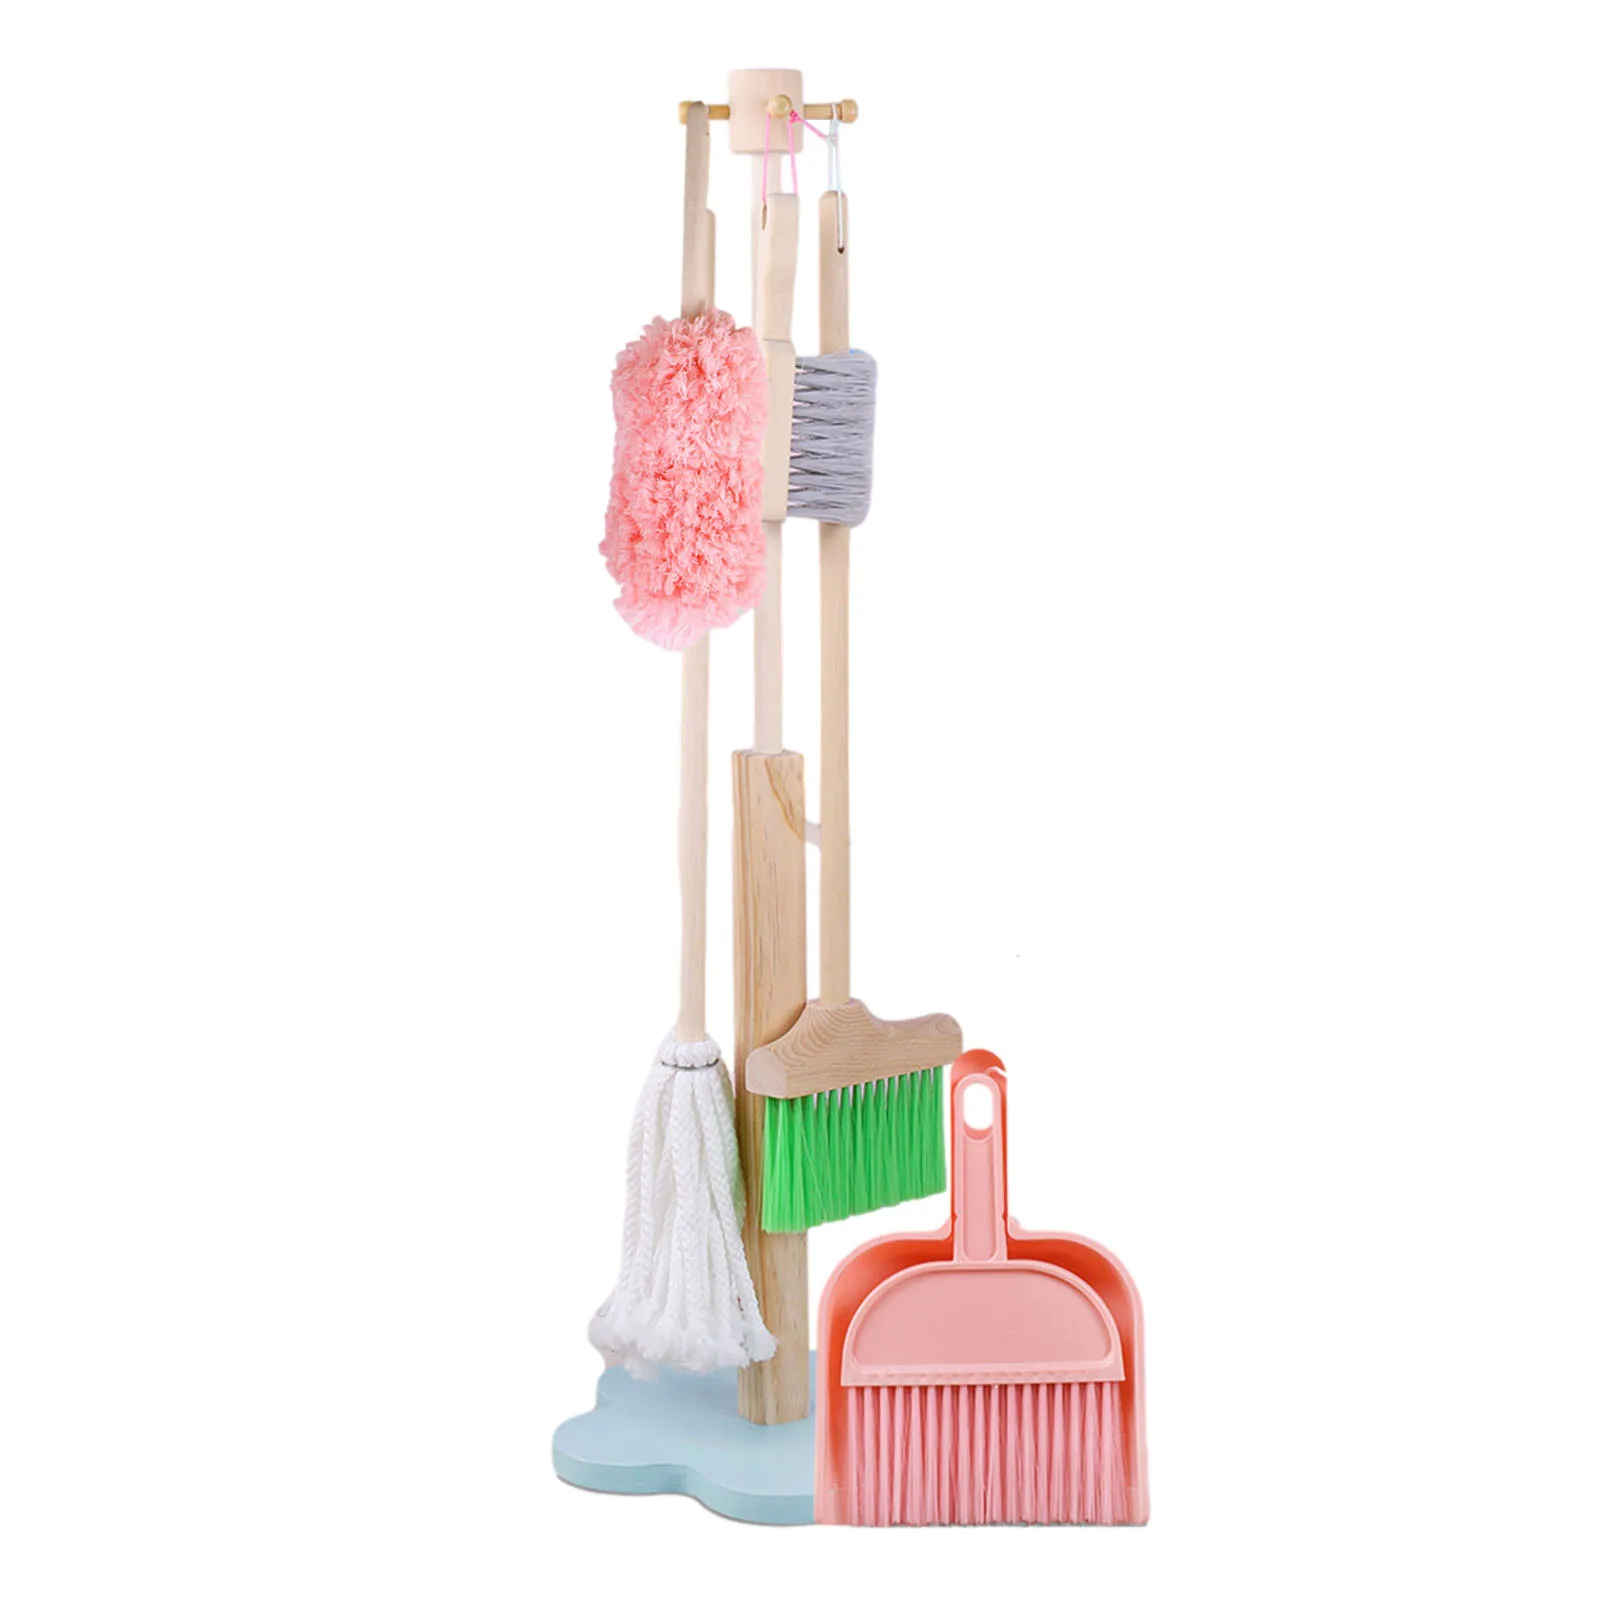 

Kids Cleaning Set Detachable Cleaning Tool Includes Broom Mop Wooden Detachable Housekeeping Broom Dustpan Duster Brush Mop For